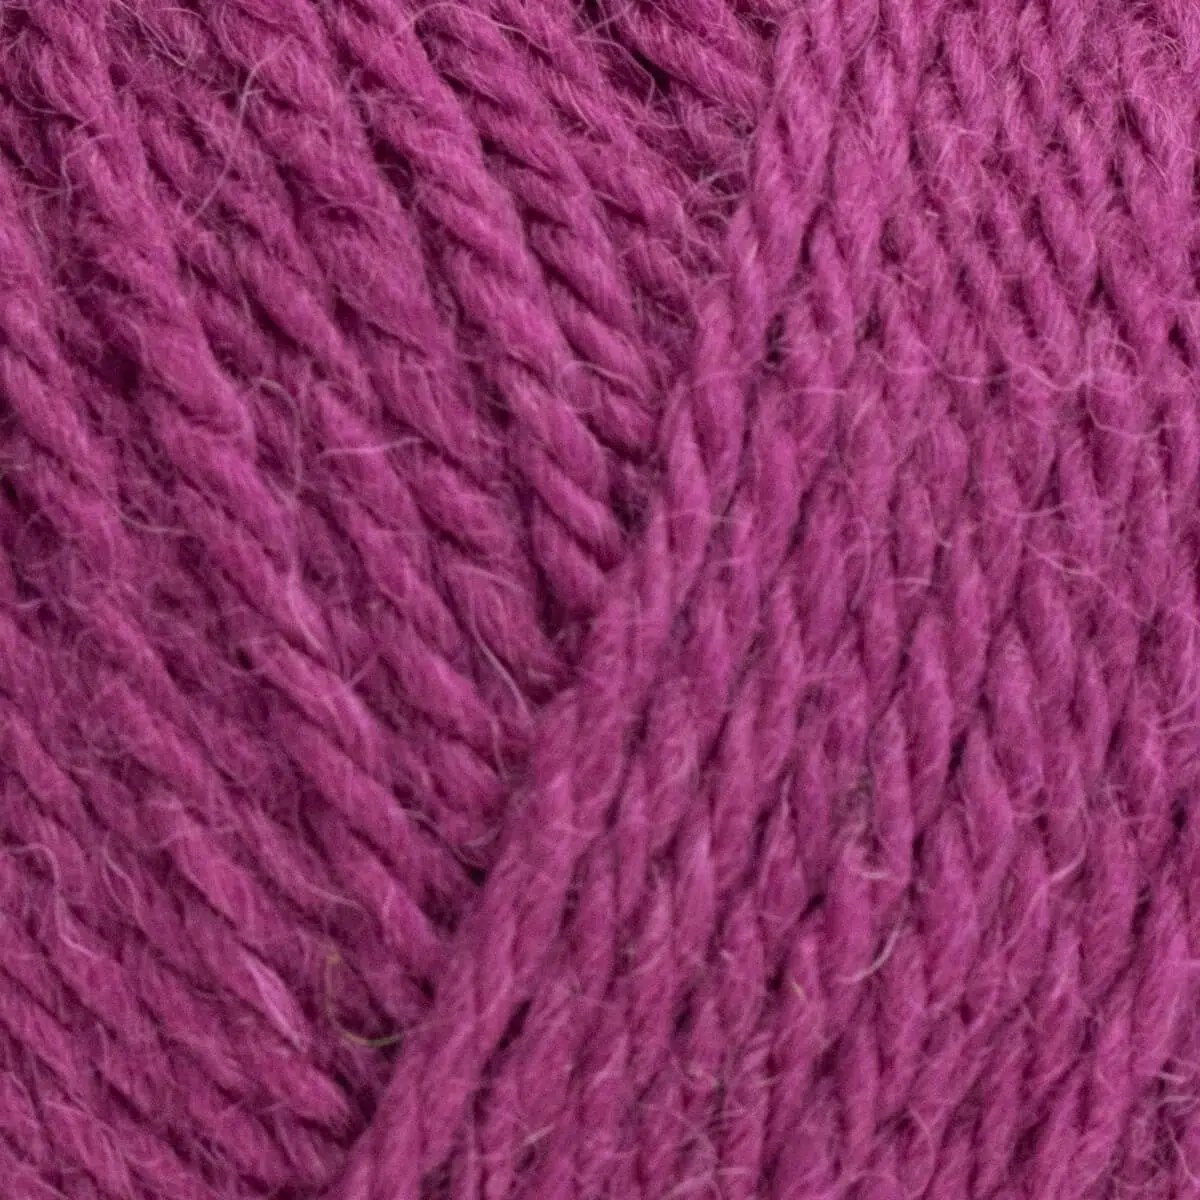 West Yorkshire Spinners - ColourLab Aran - 1176 Mulberry Pink